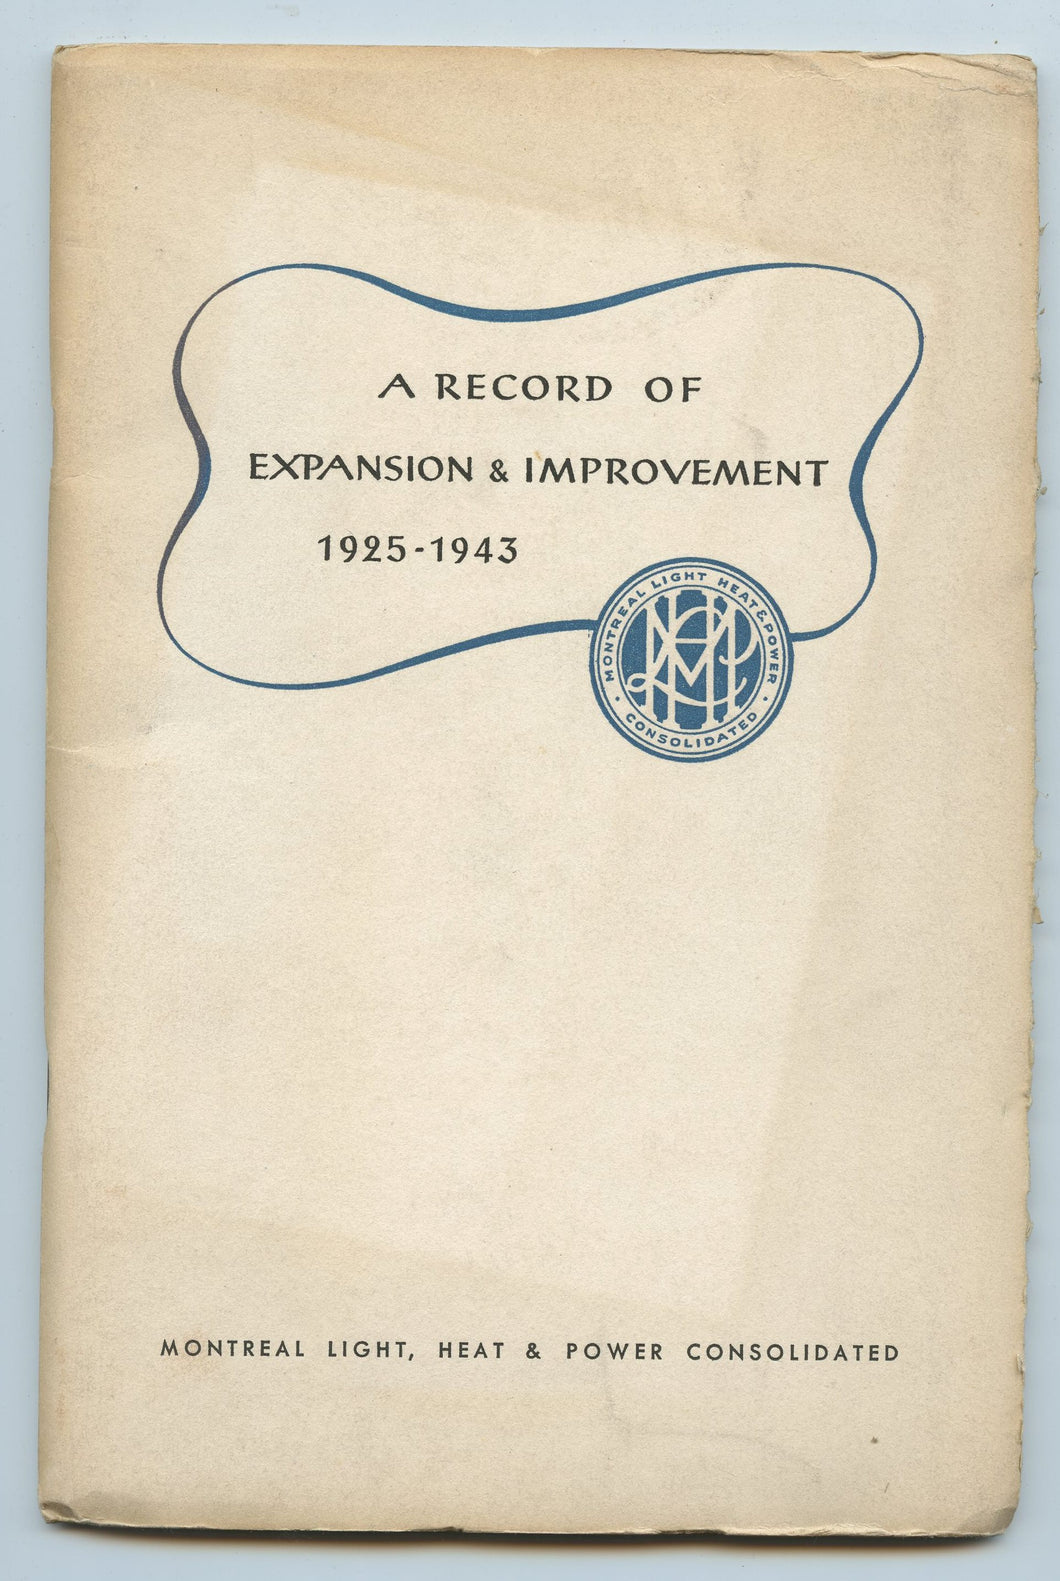 A Record of Expansion & Improvement 1925-1943